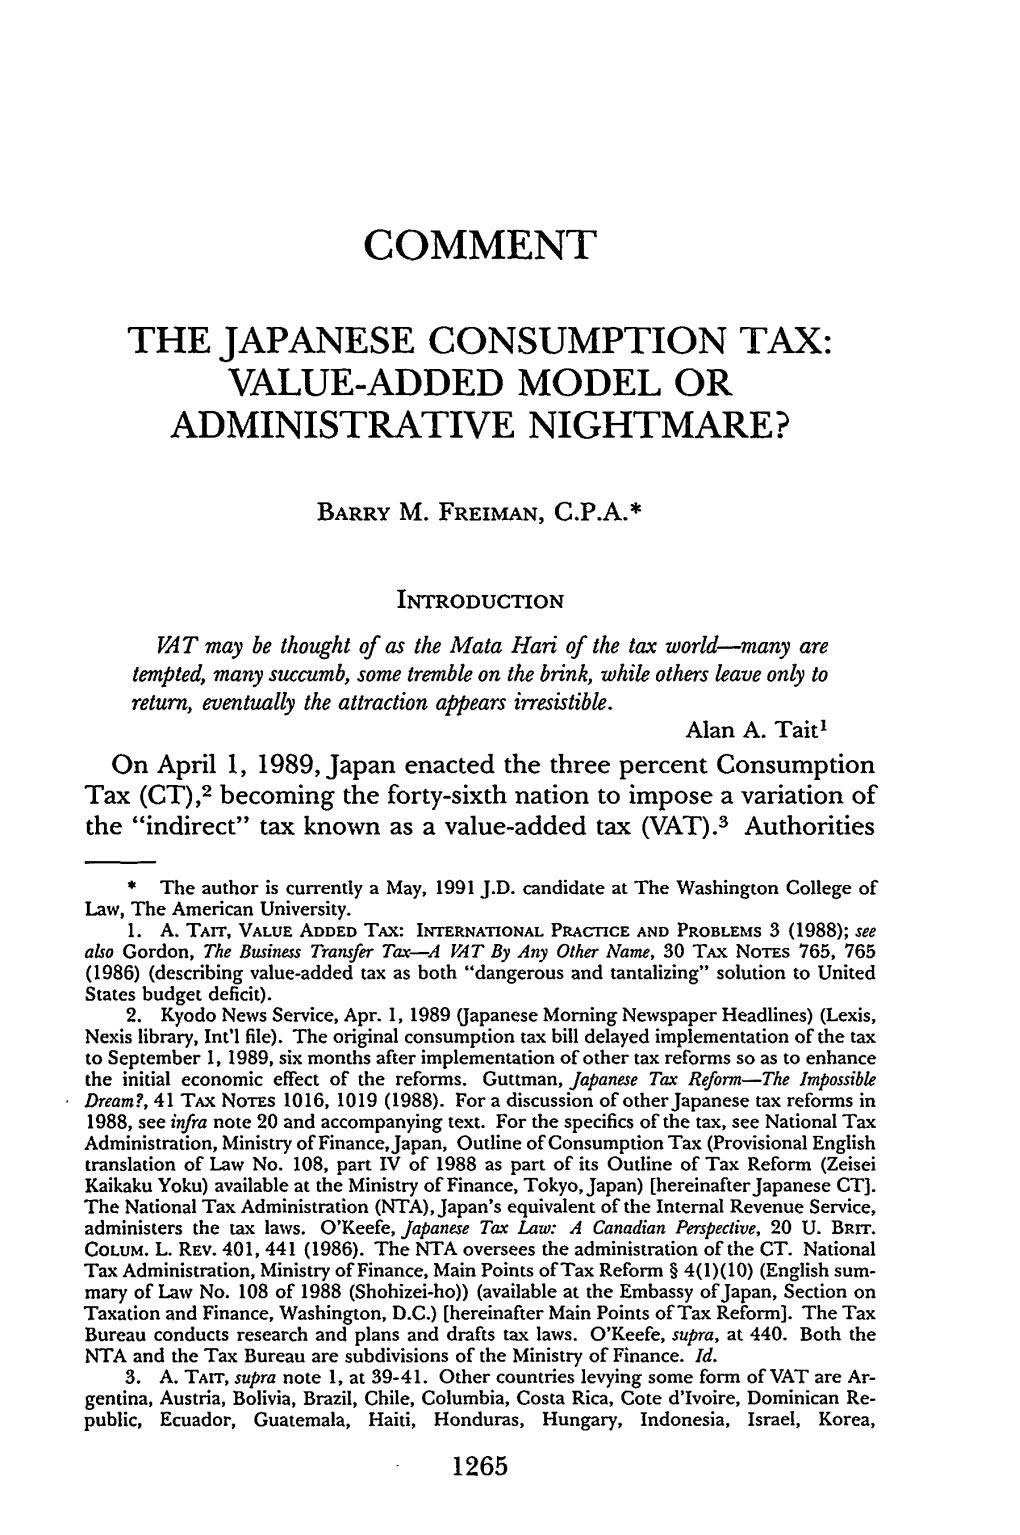 The Japanese Consumption Tax: Value-Added Model Or Administrative Nightmare?